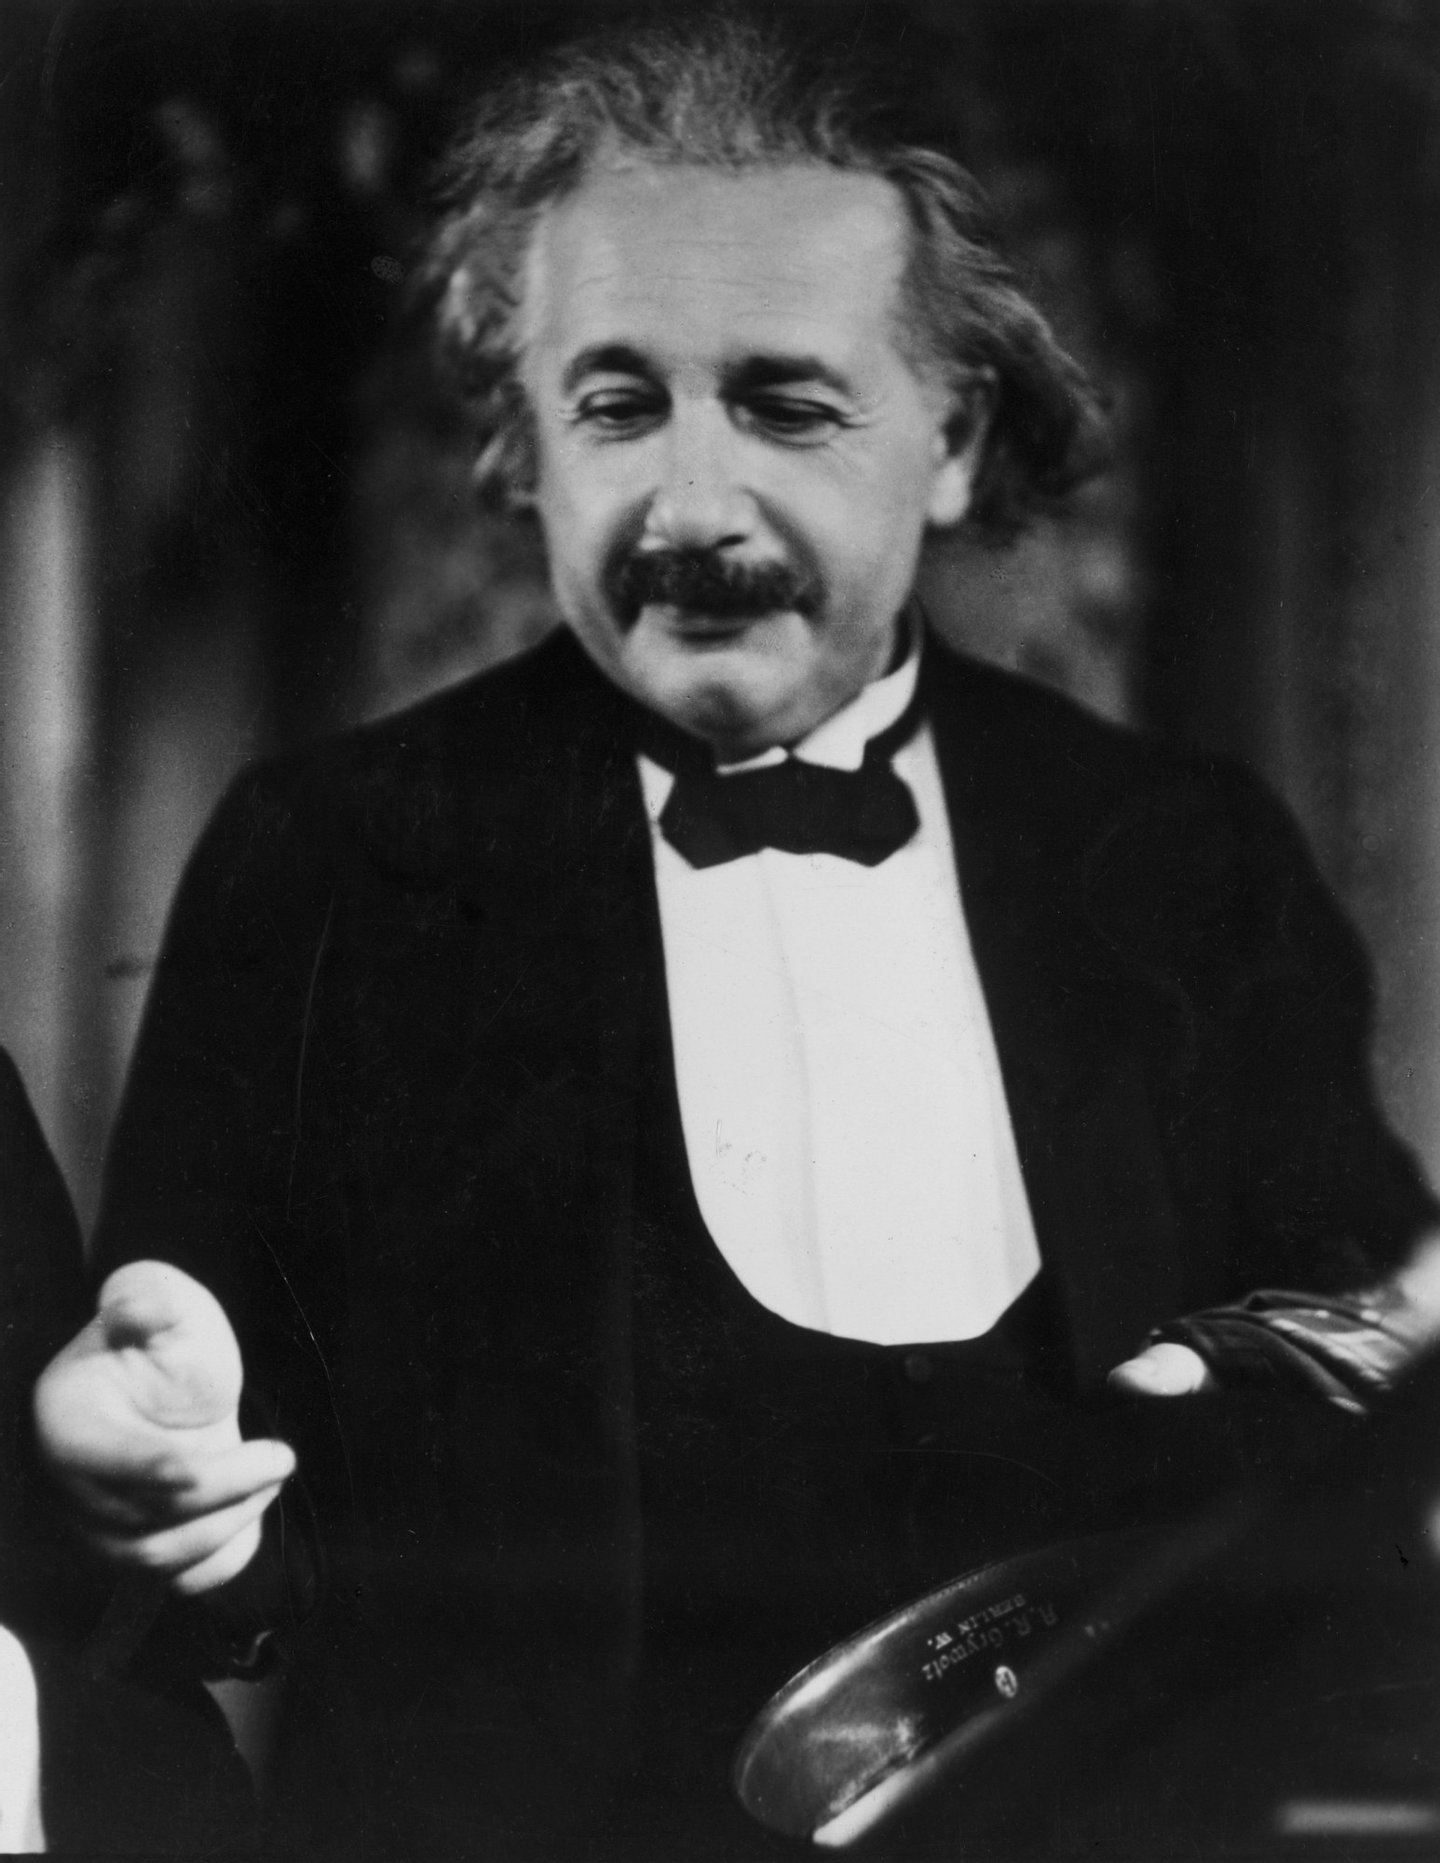 February 1931: Albert Einstein (1879-1955), German-born American physicist and Nobel laureate, best known as the creator of the special and general theories of relativity and for his bold hypothesis concerning the particle nature of light. He is perhaps the best-known scientist of the 20th century. (Photo by Sasha/Getty Images)